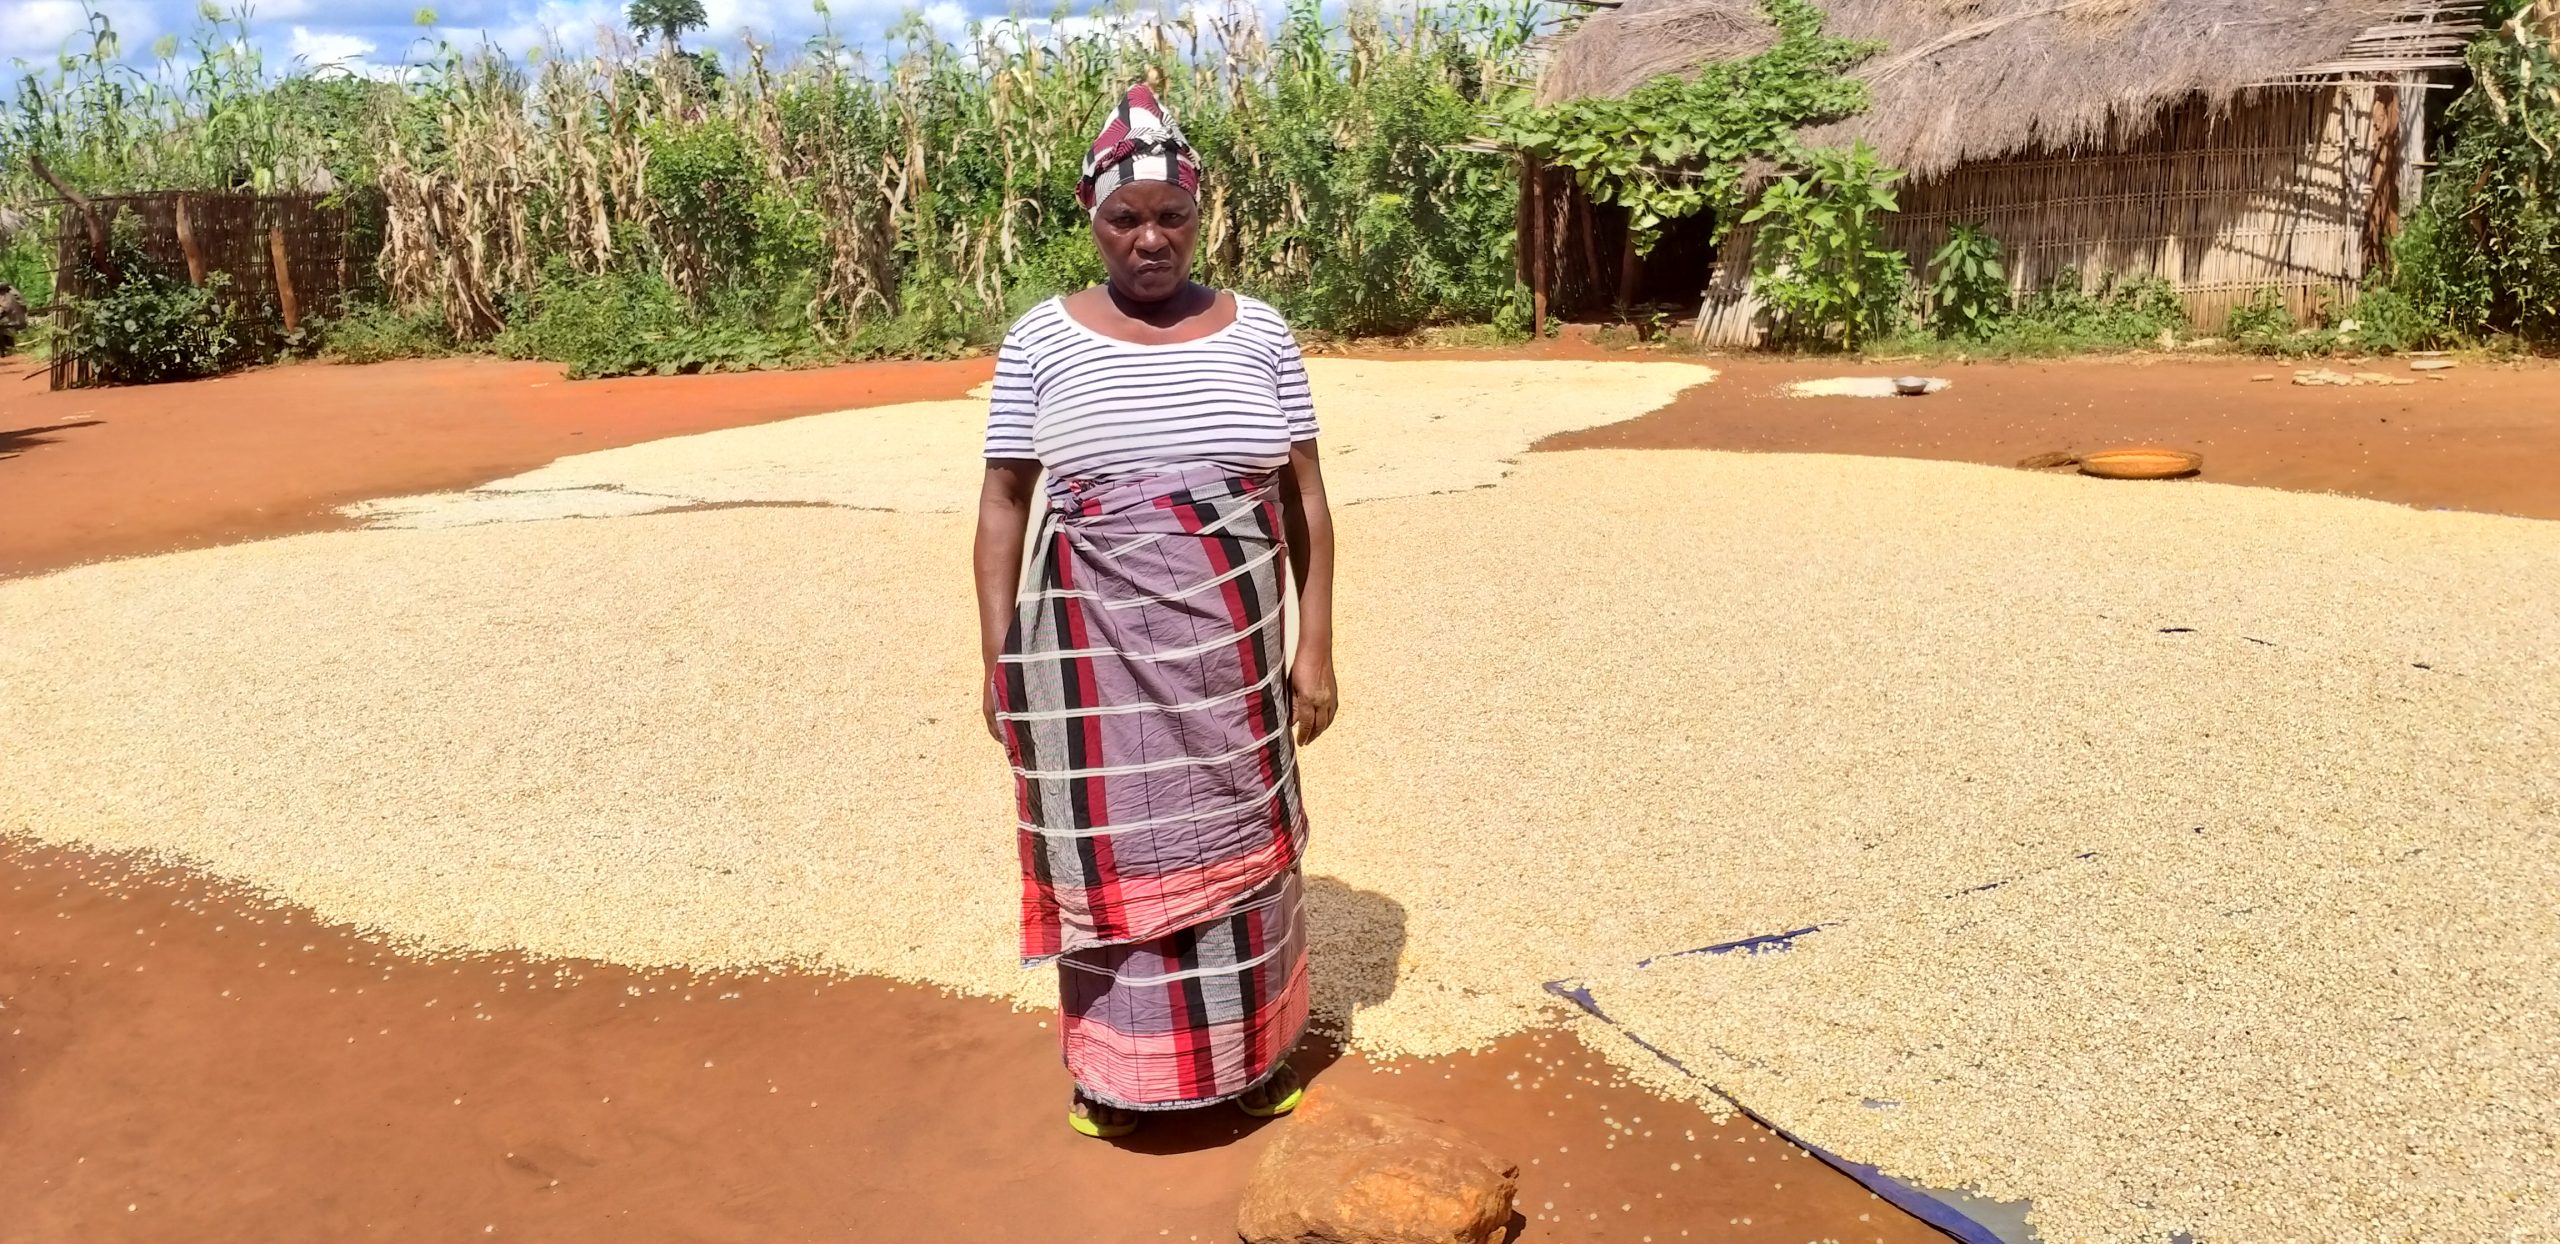 Jacinta Fernando is one of many farmers in northern Mozambique dealing with multiple crises at once. In this photo, she stands in front of her soy harvest.